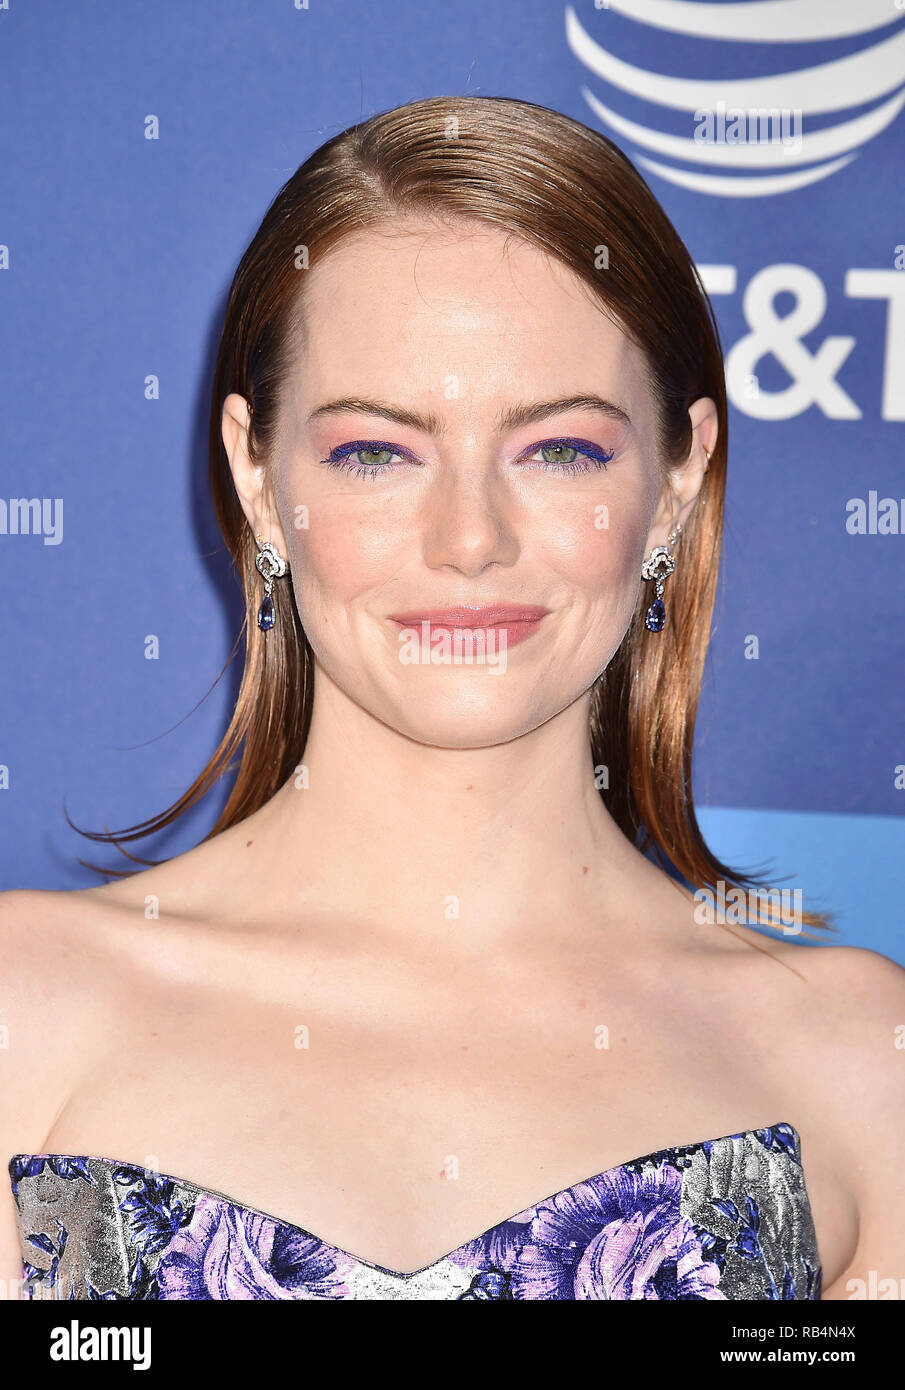 EMMA STONE American film actress at  the 30th Annual Palm Springs International Film Festival Film Awards Gala at Palm Springs Convention Center on January 3, 2019 in Palm Springs, California. Photo: Jeffrey Mayer Stock Photo